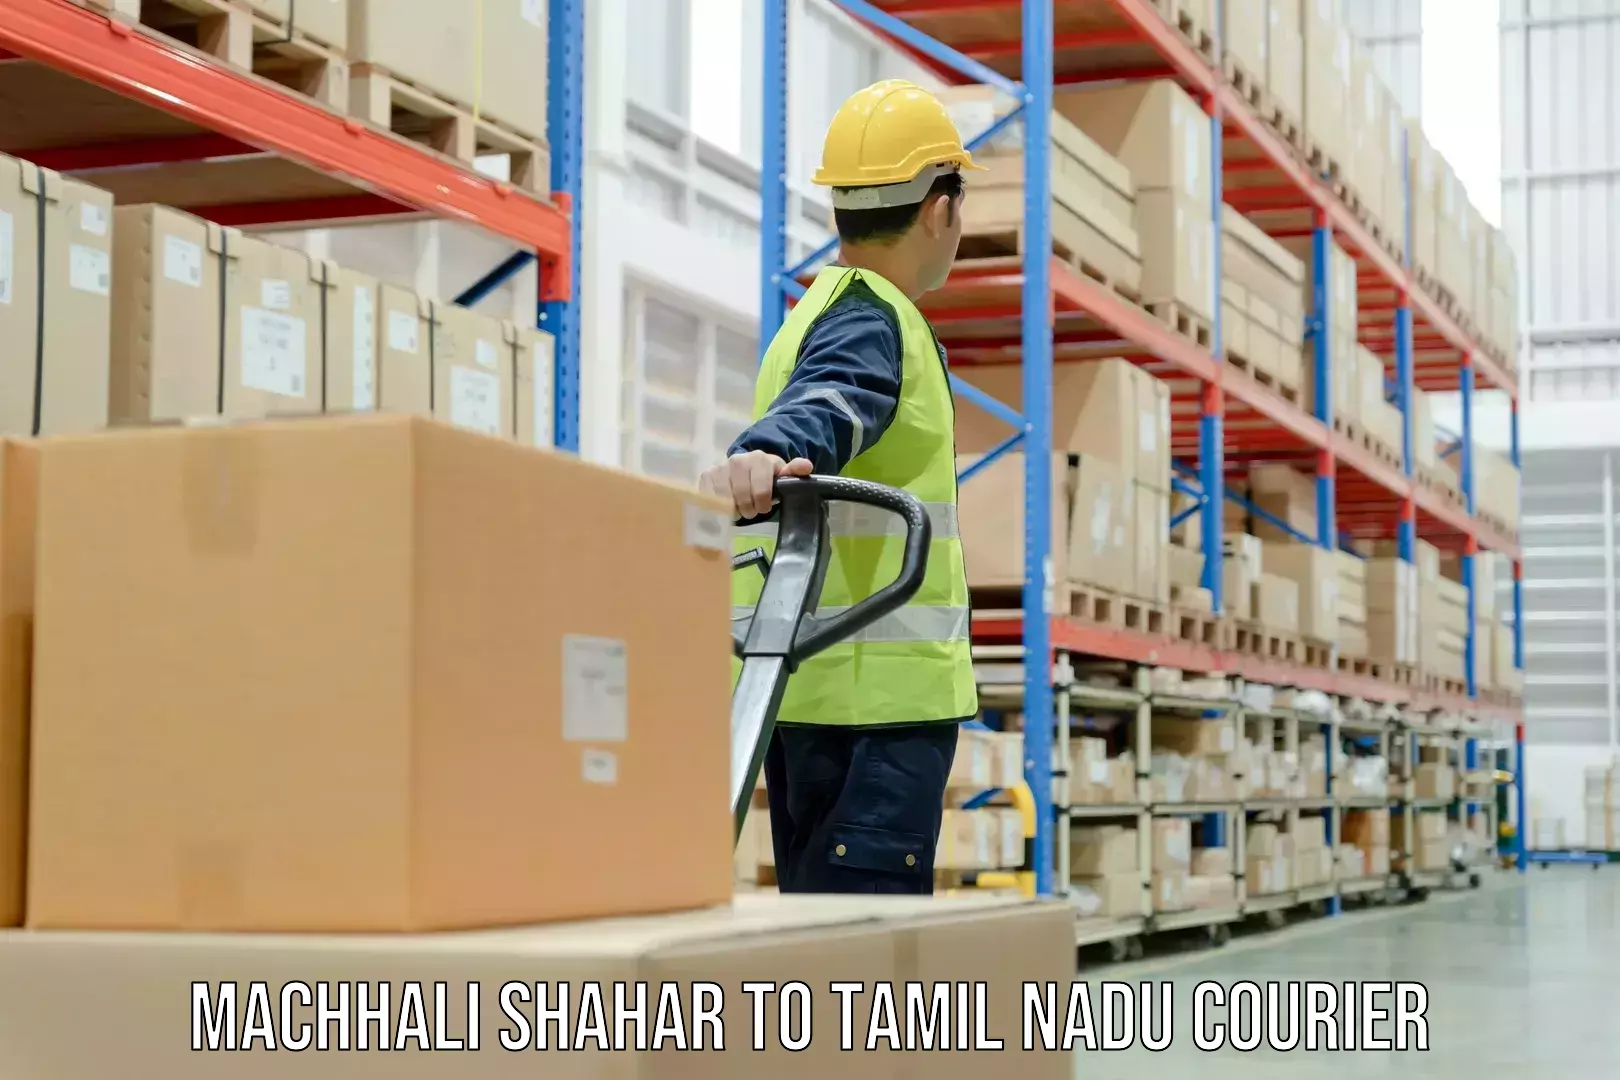 Sustainable shipping practices in Machhali Shahar to Thisayanvilai